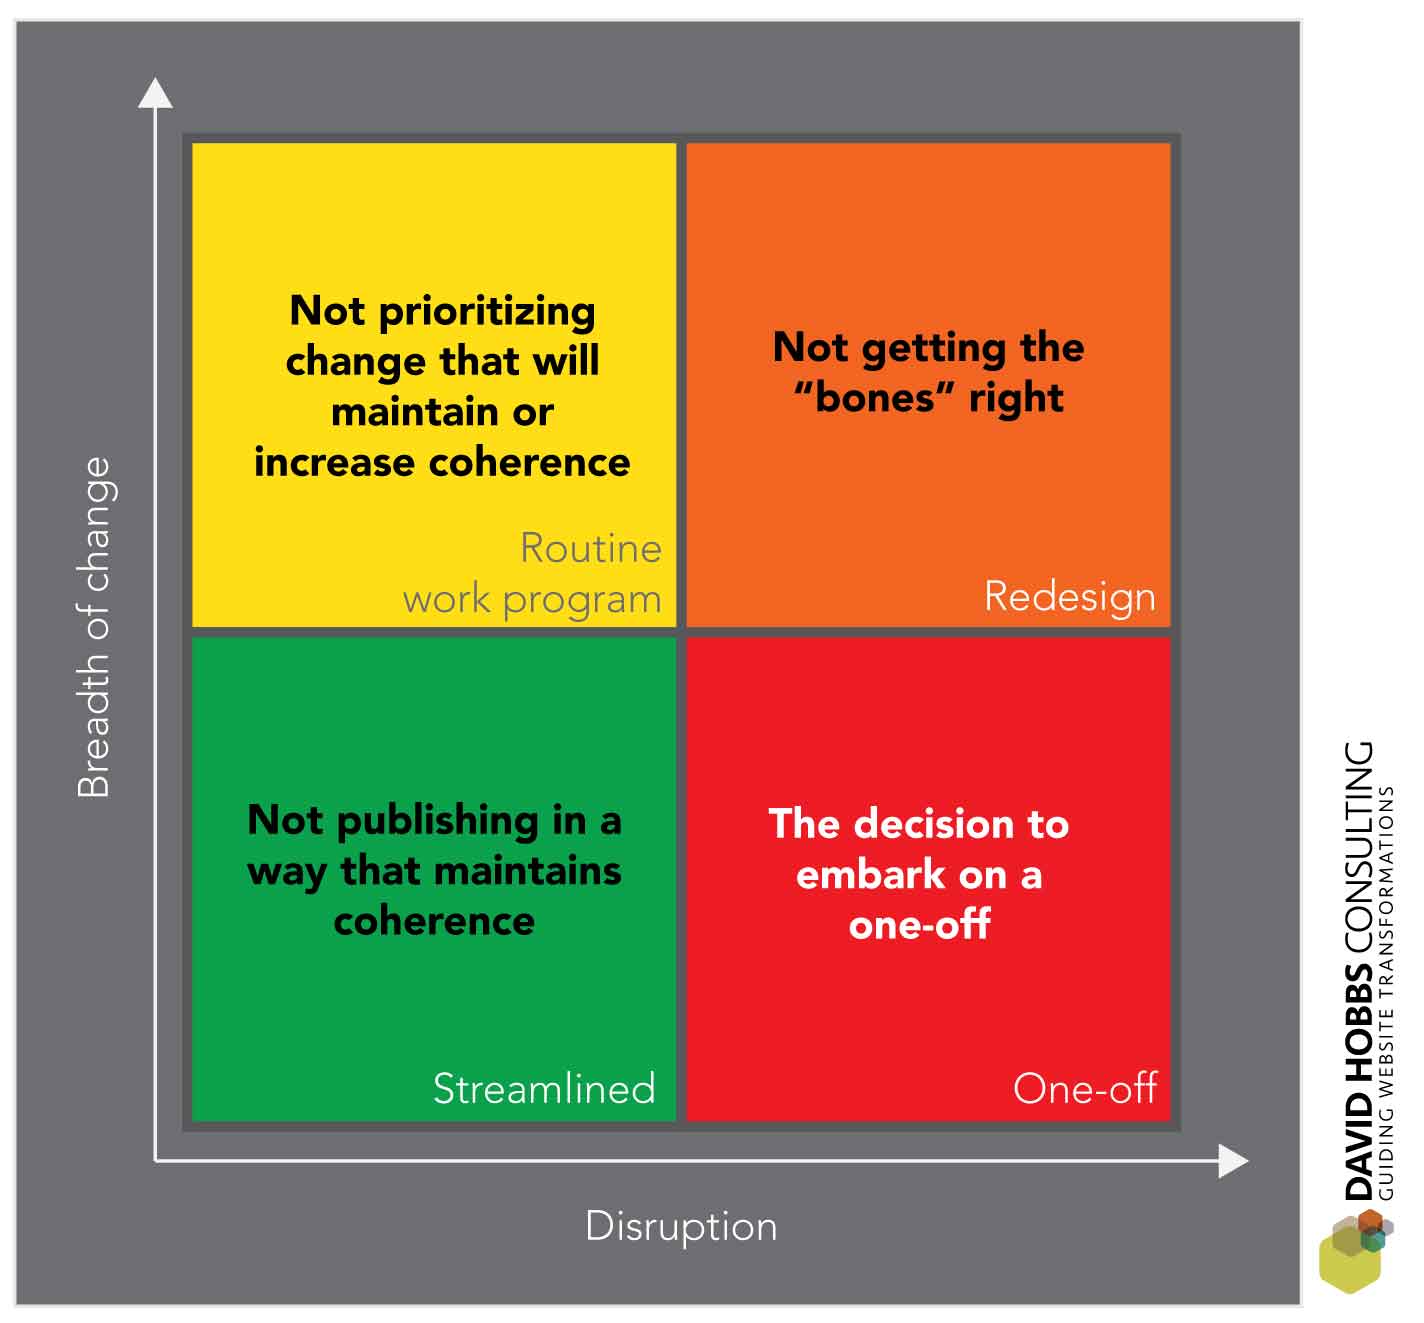 We insert problems that hasten the need for the next redesign in all quadrants